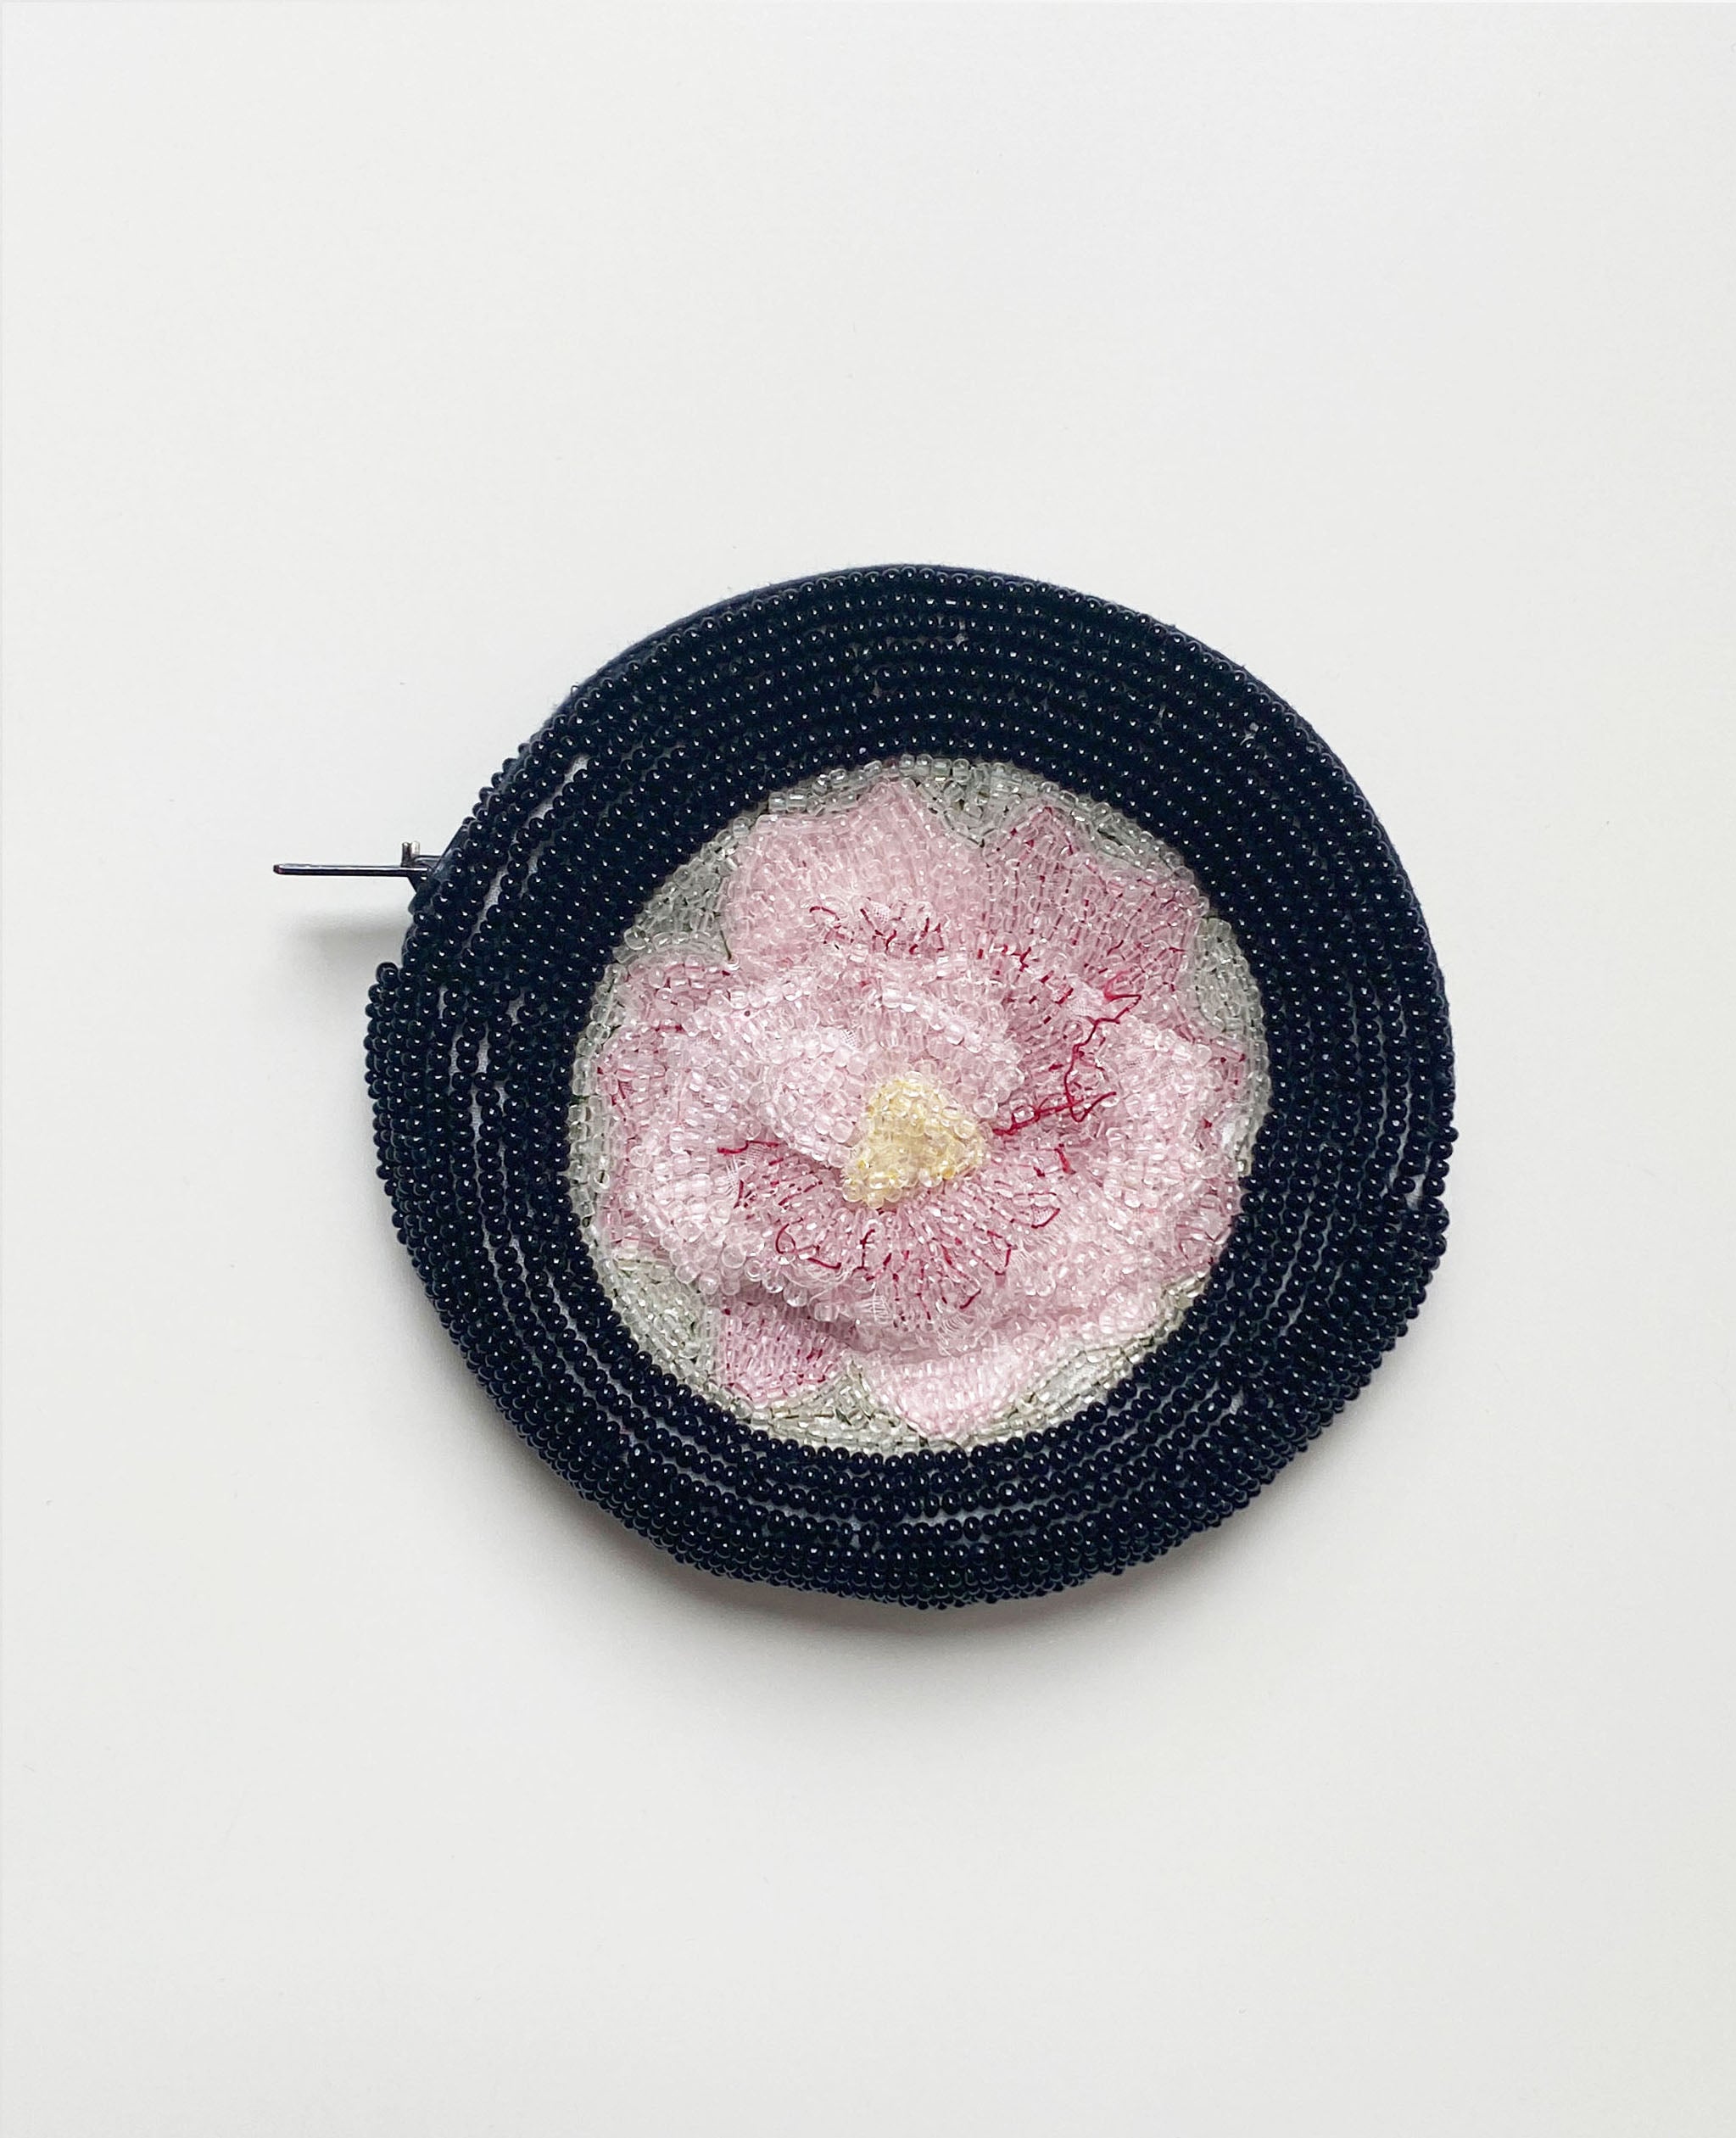 Hand Beaded Floral Coin Purse